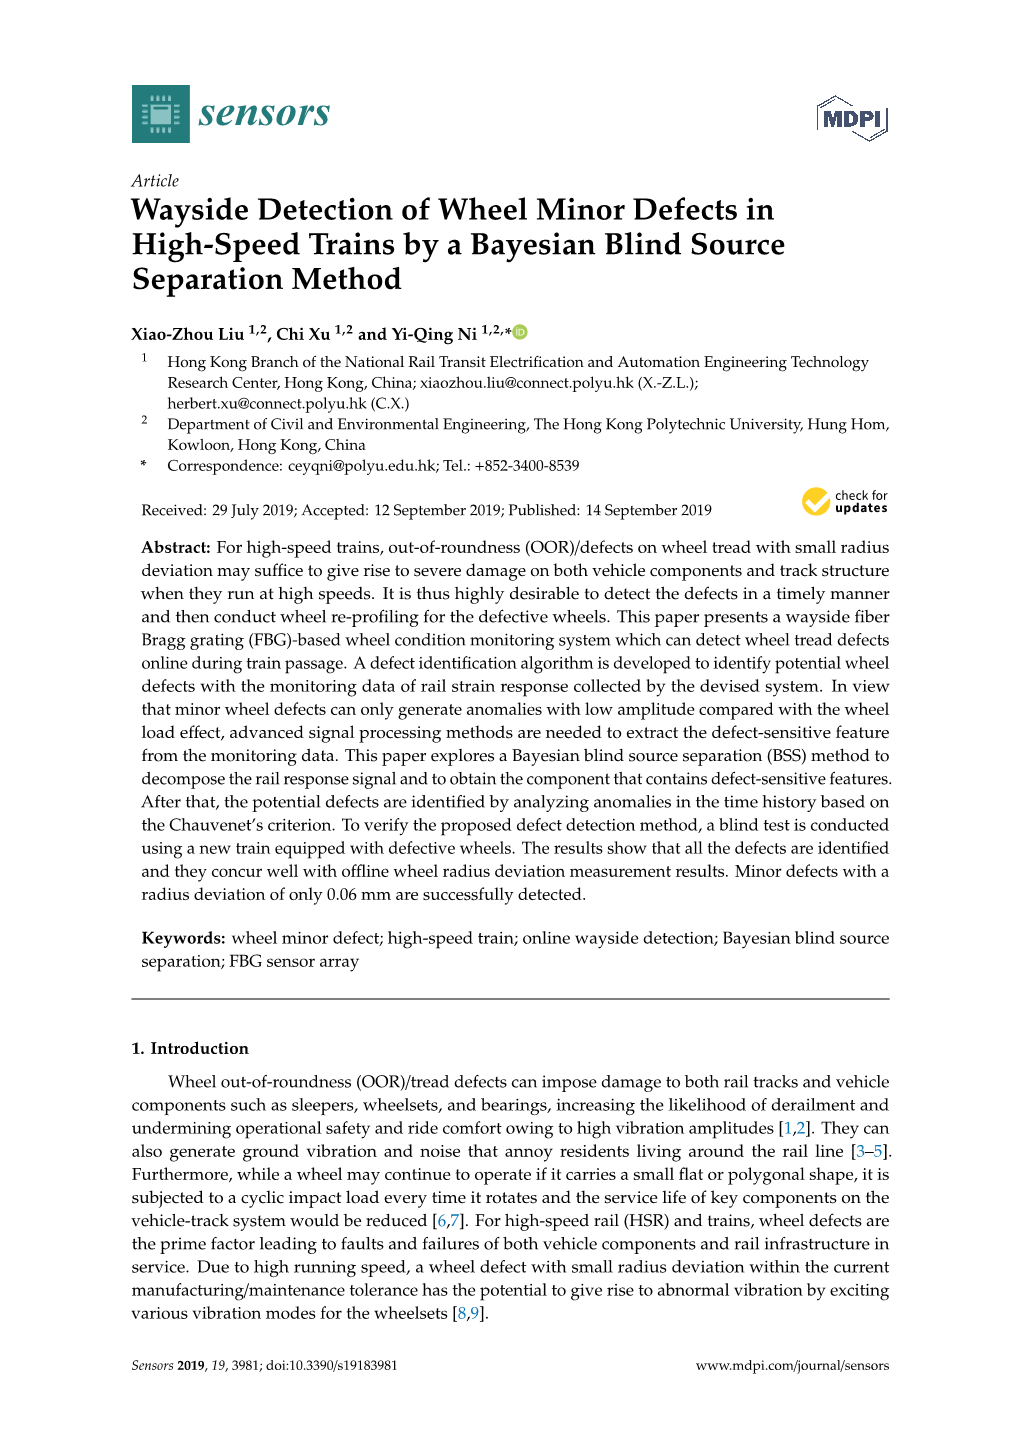 Wayside Detection of Wheel Minor Defects in High-Speed Trains by a Bayesian Blind Source Separation Method